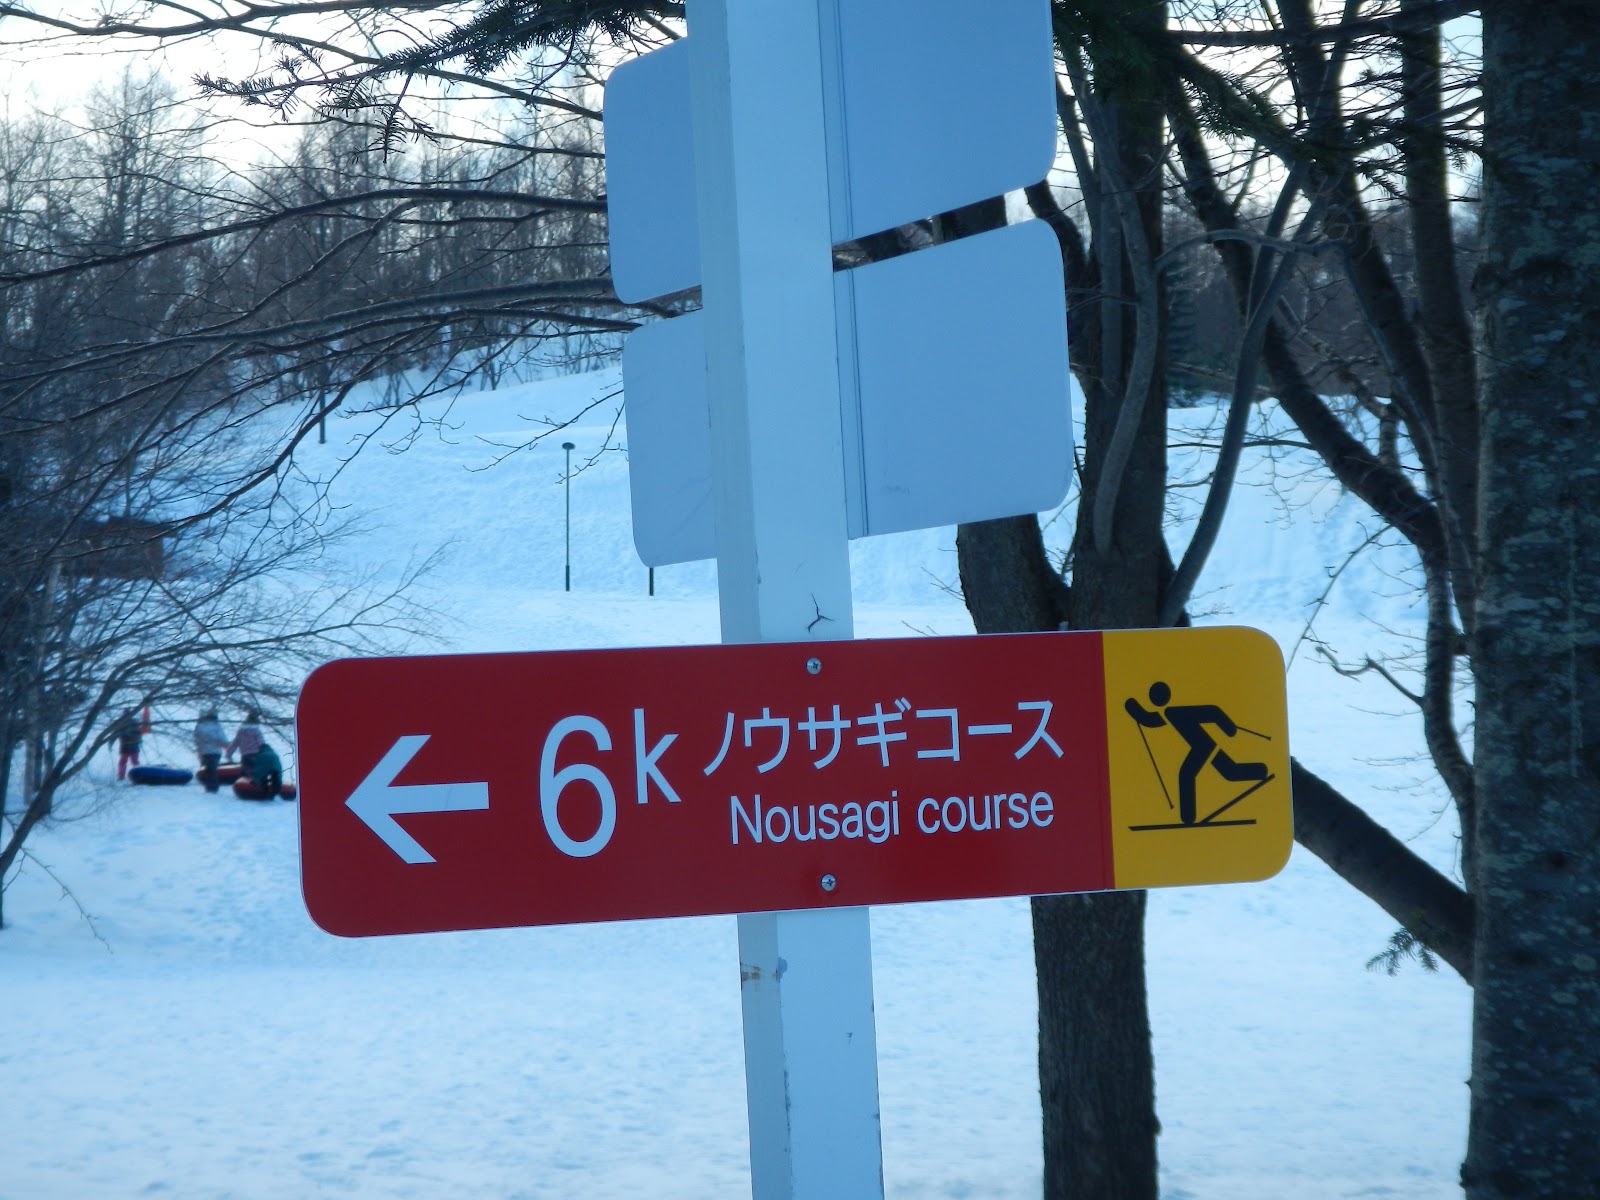 Kyle and Bre in Japan: Cross-country skiing